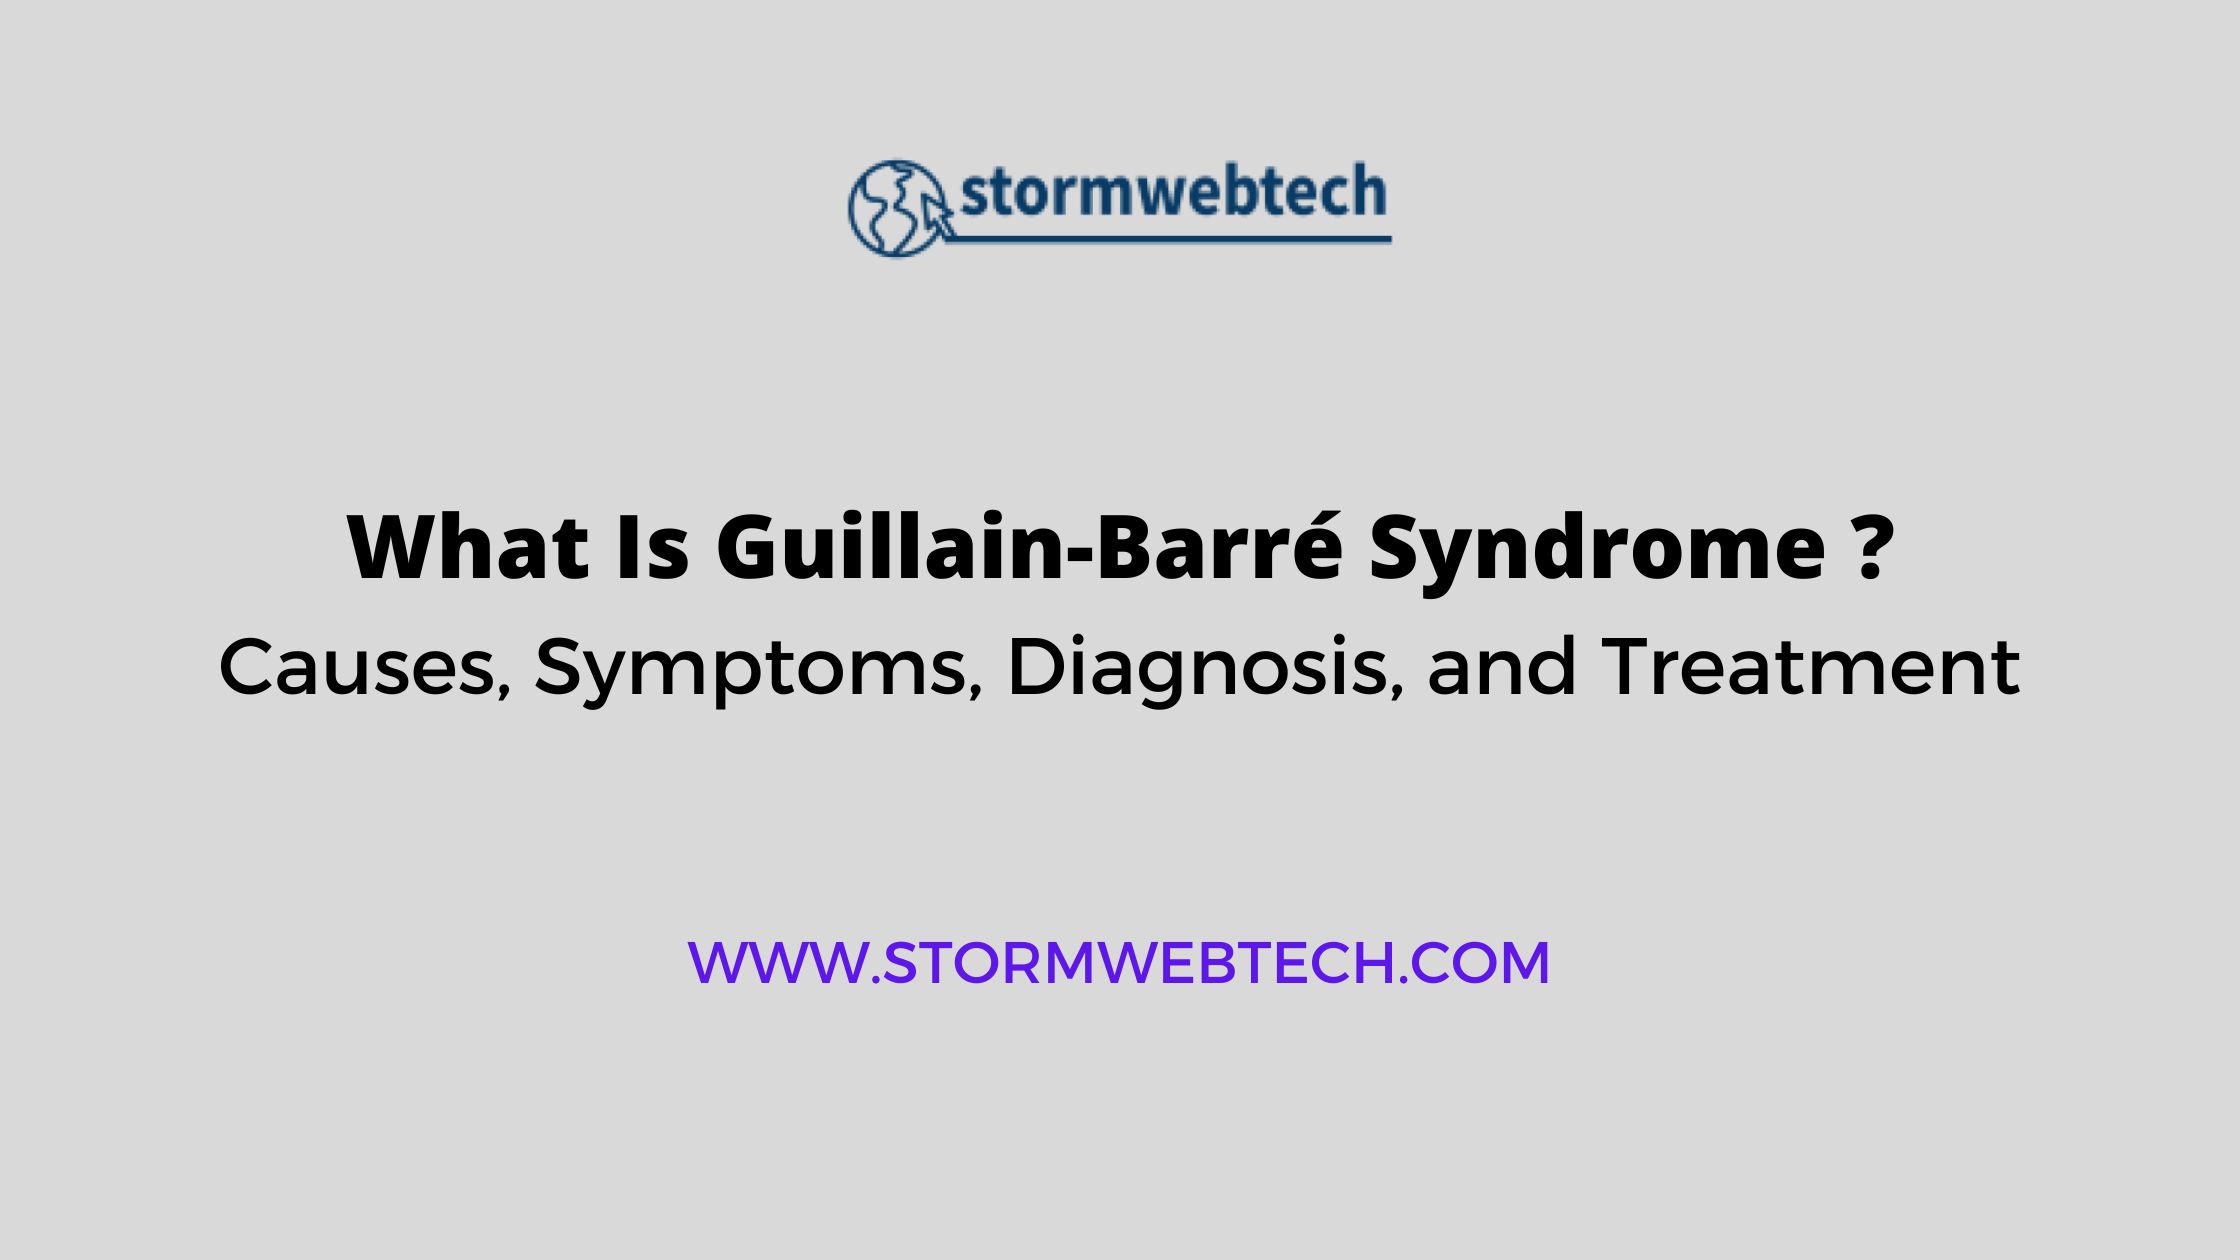 What Is Guillain-Barré Syndrome, causes of Guillain-Barré Syndrome, symptoms of Guillain-Barré Syndrome, treatment of Guillain-Barré Syndrome